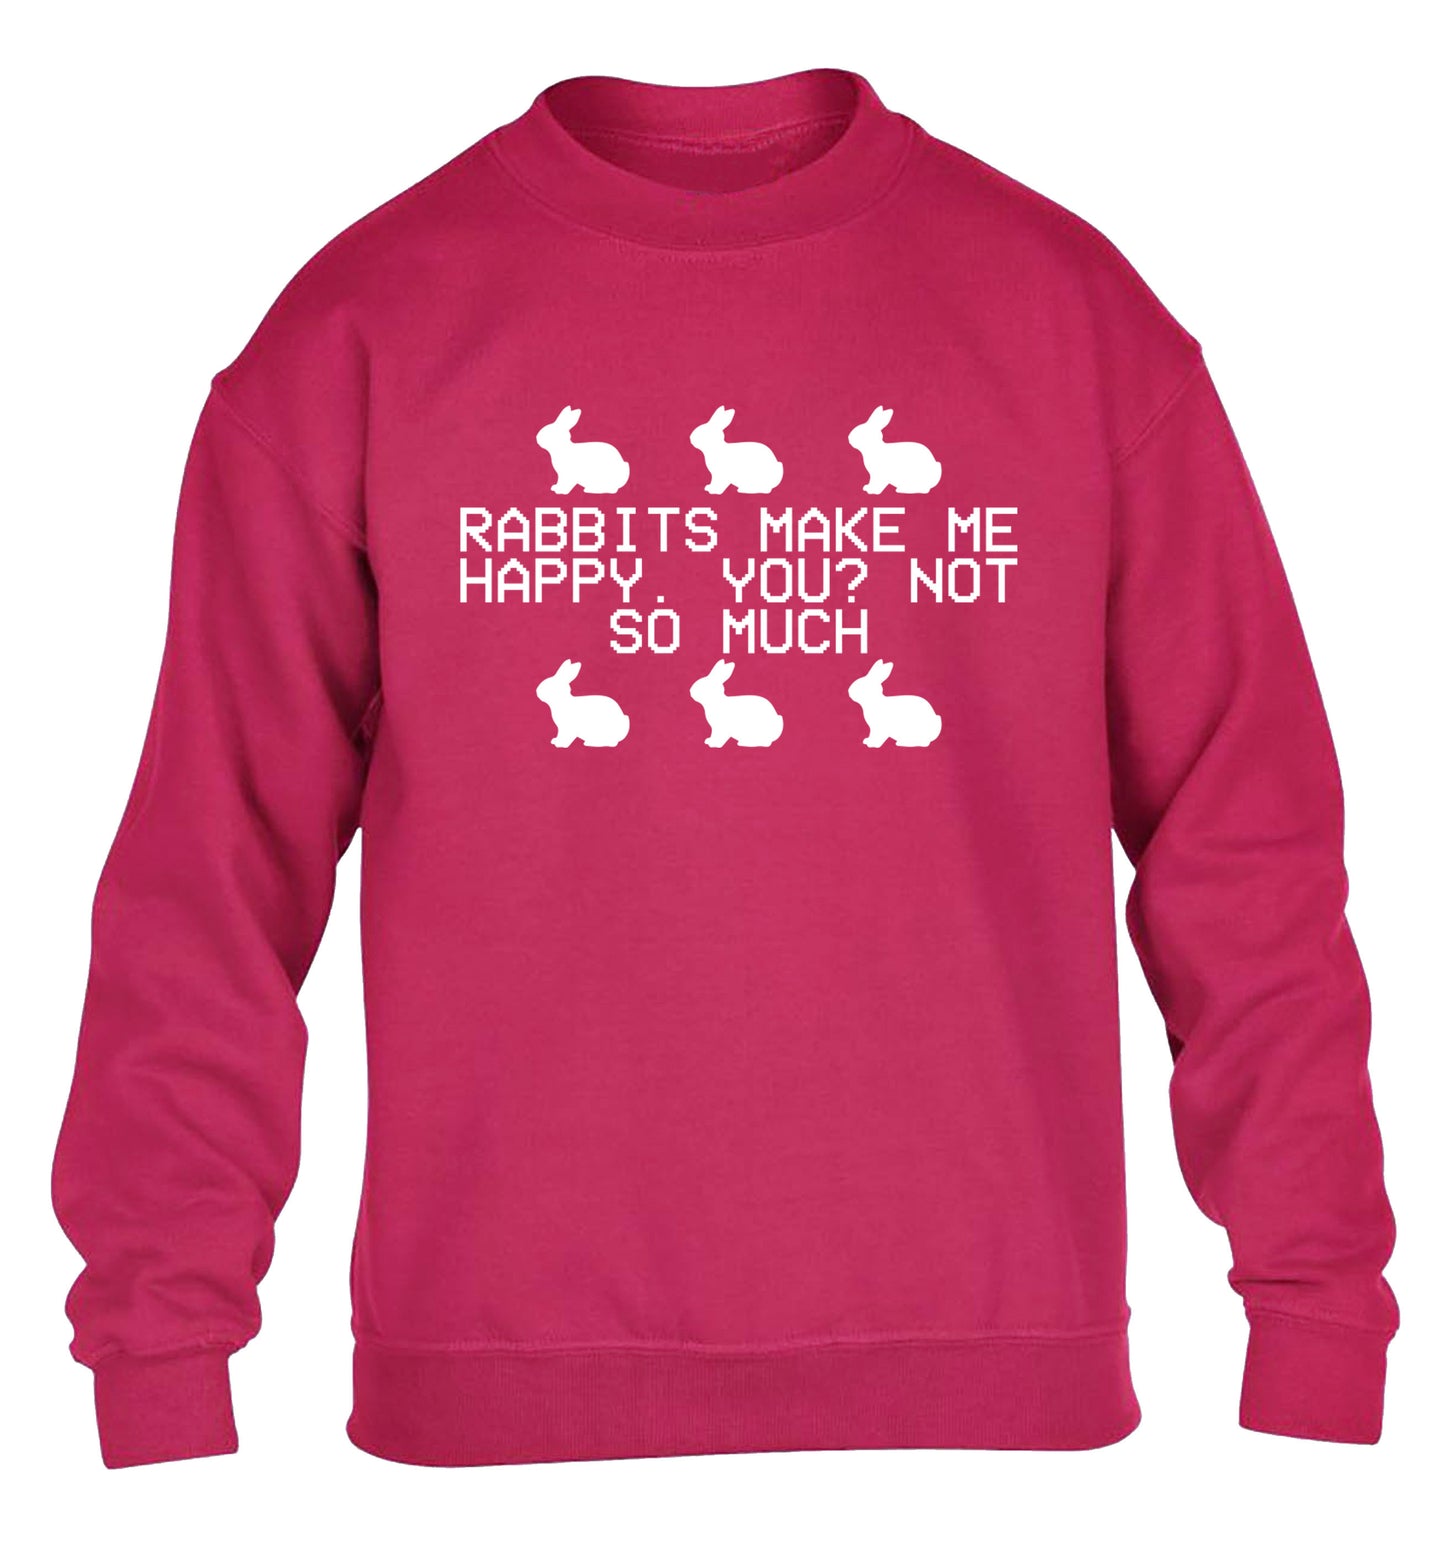 Rabbits make me happy, you not so much children's pink  sweater 12-14 Years